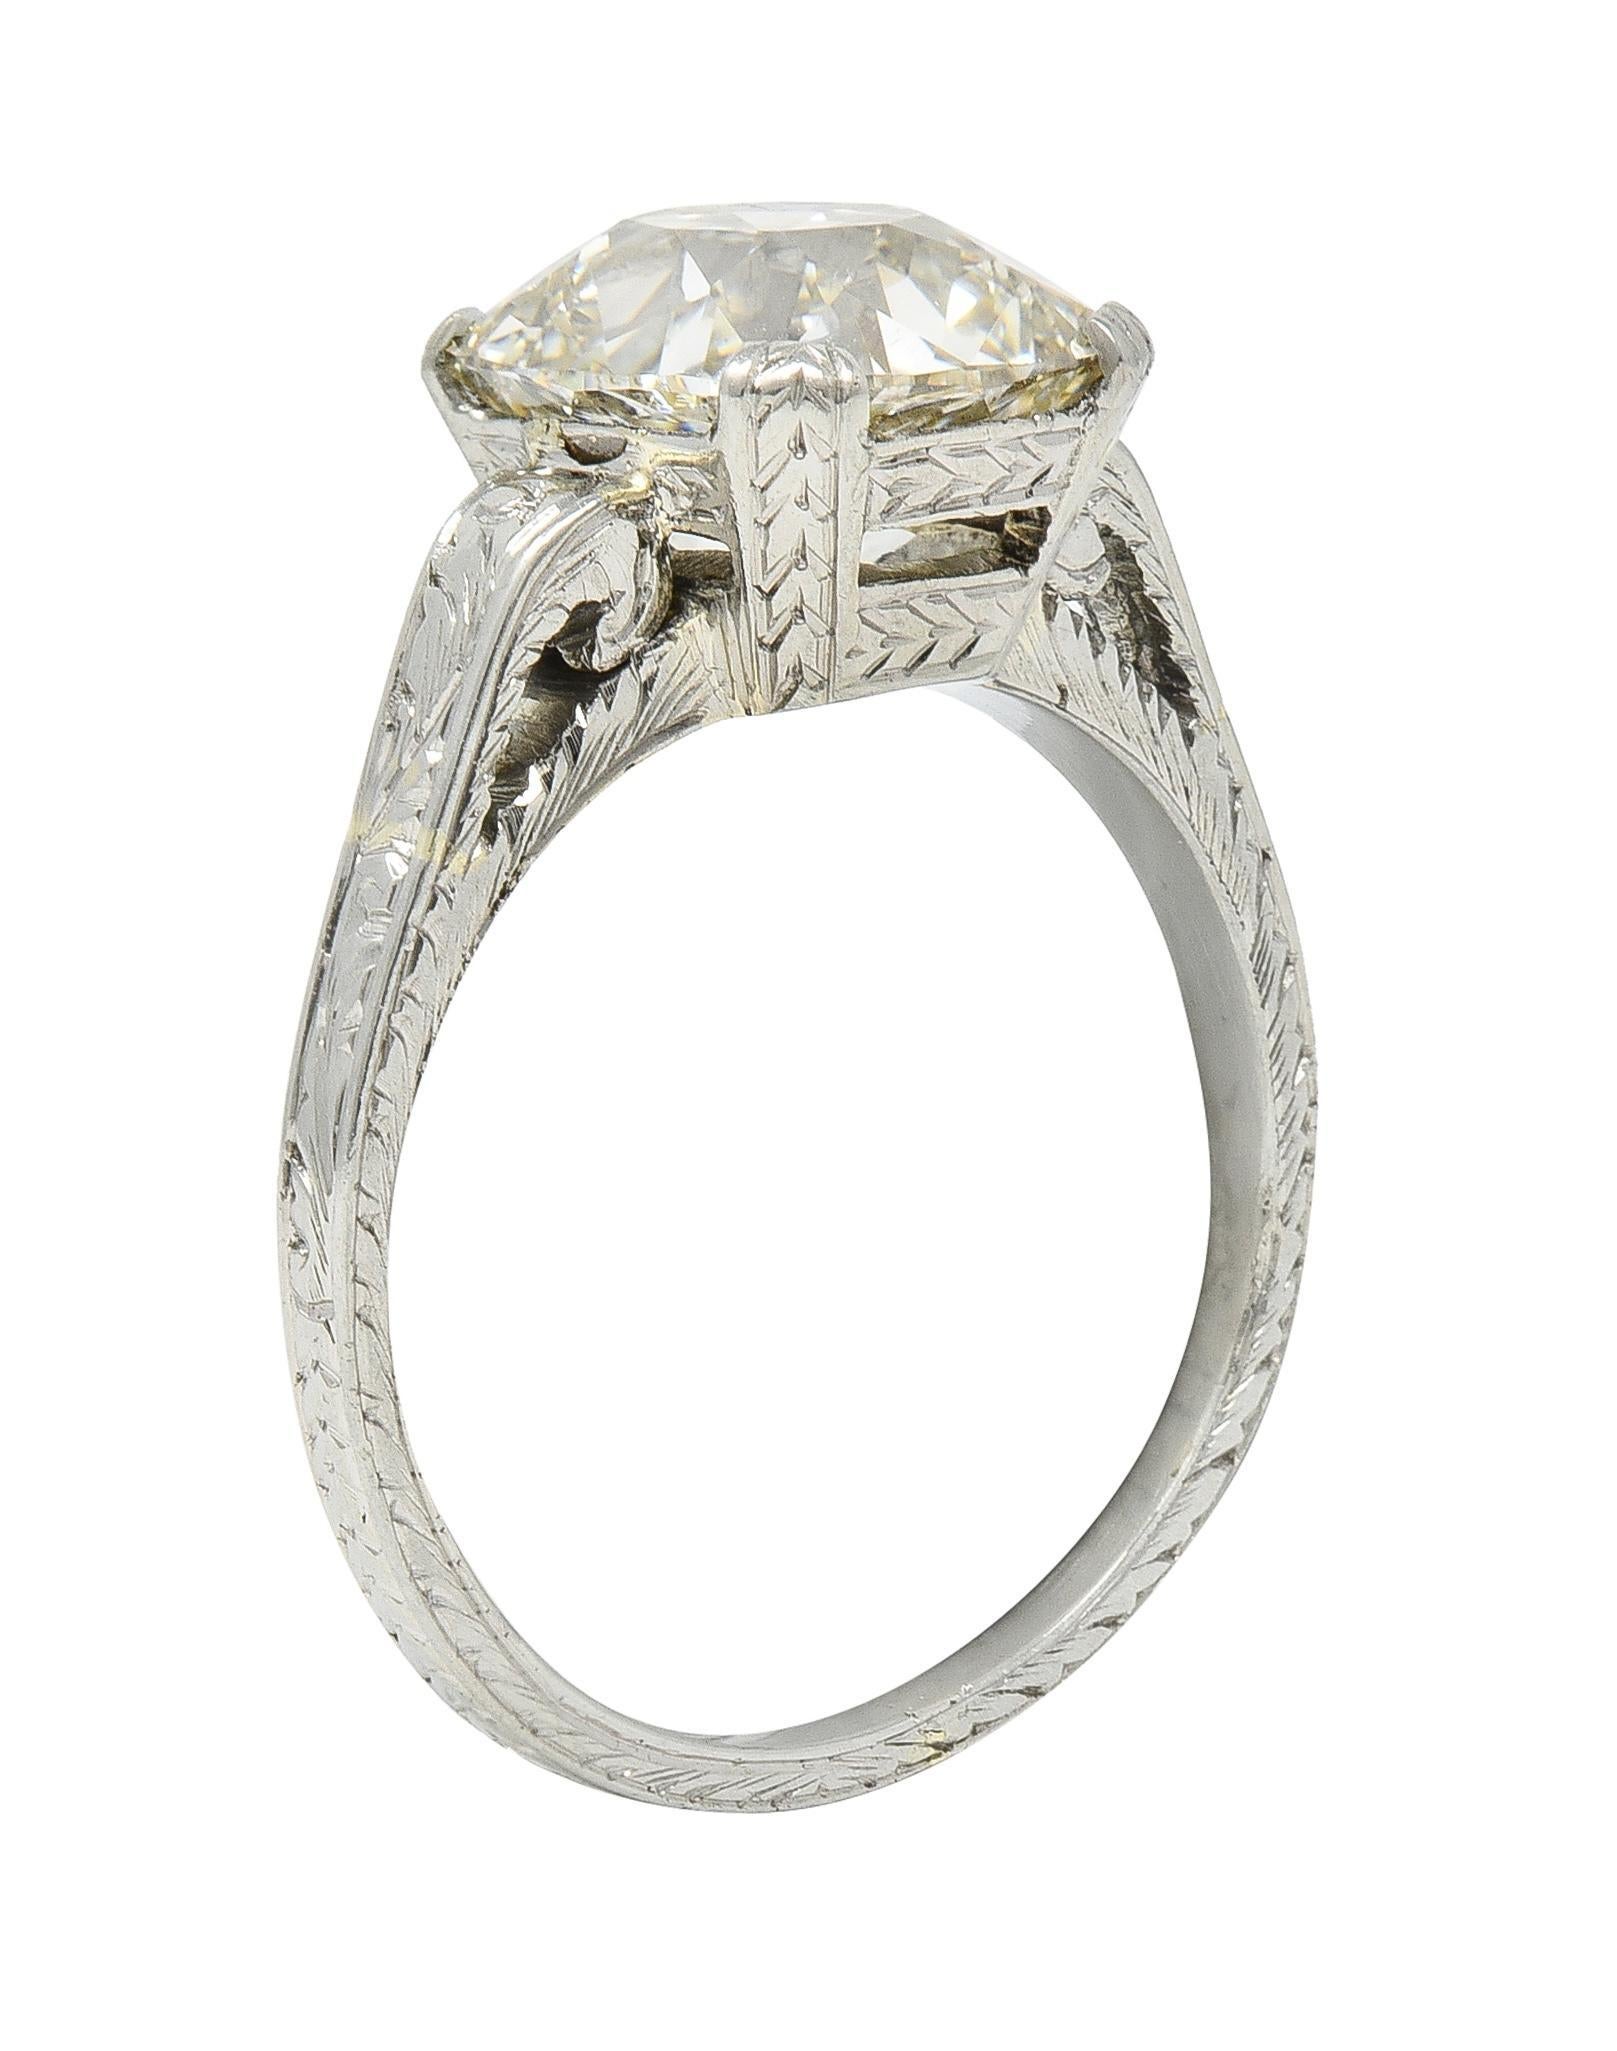 Centering an old mine cut diamond weighing 2.69 carats - M color with SI1 clarity 
Set with wide prongs and a detailed wheat motif engraved basket 
Flanked by scrolling volute shoulders engraved with scroll motif
With engraved wheat motif